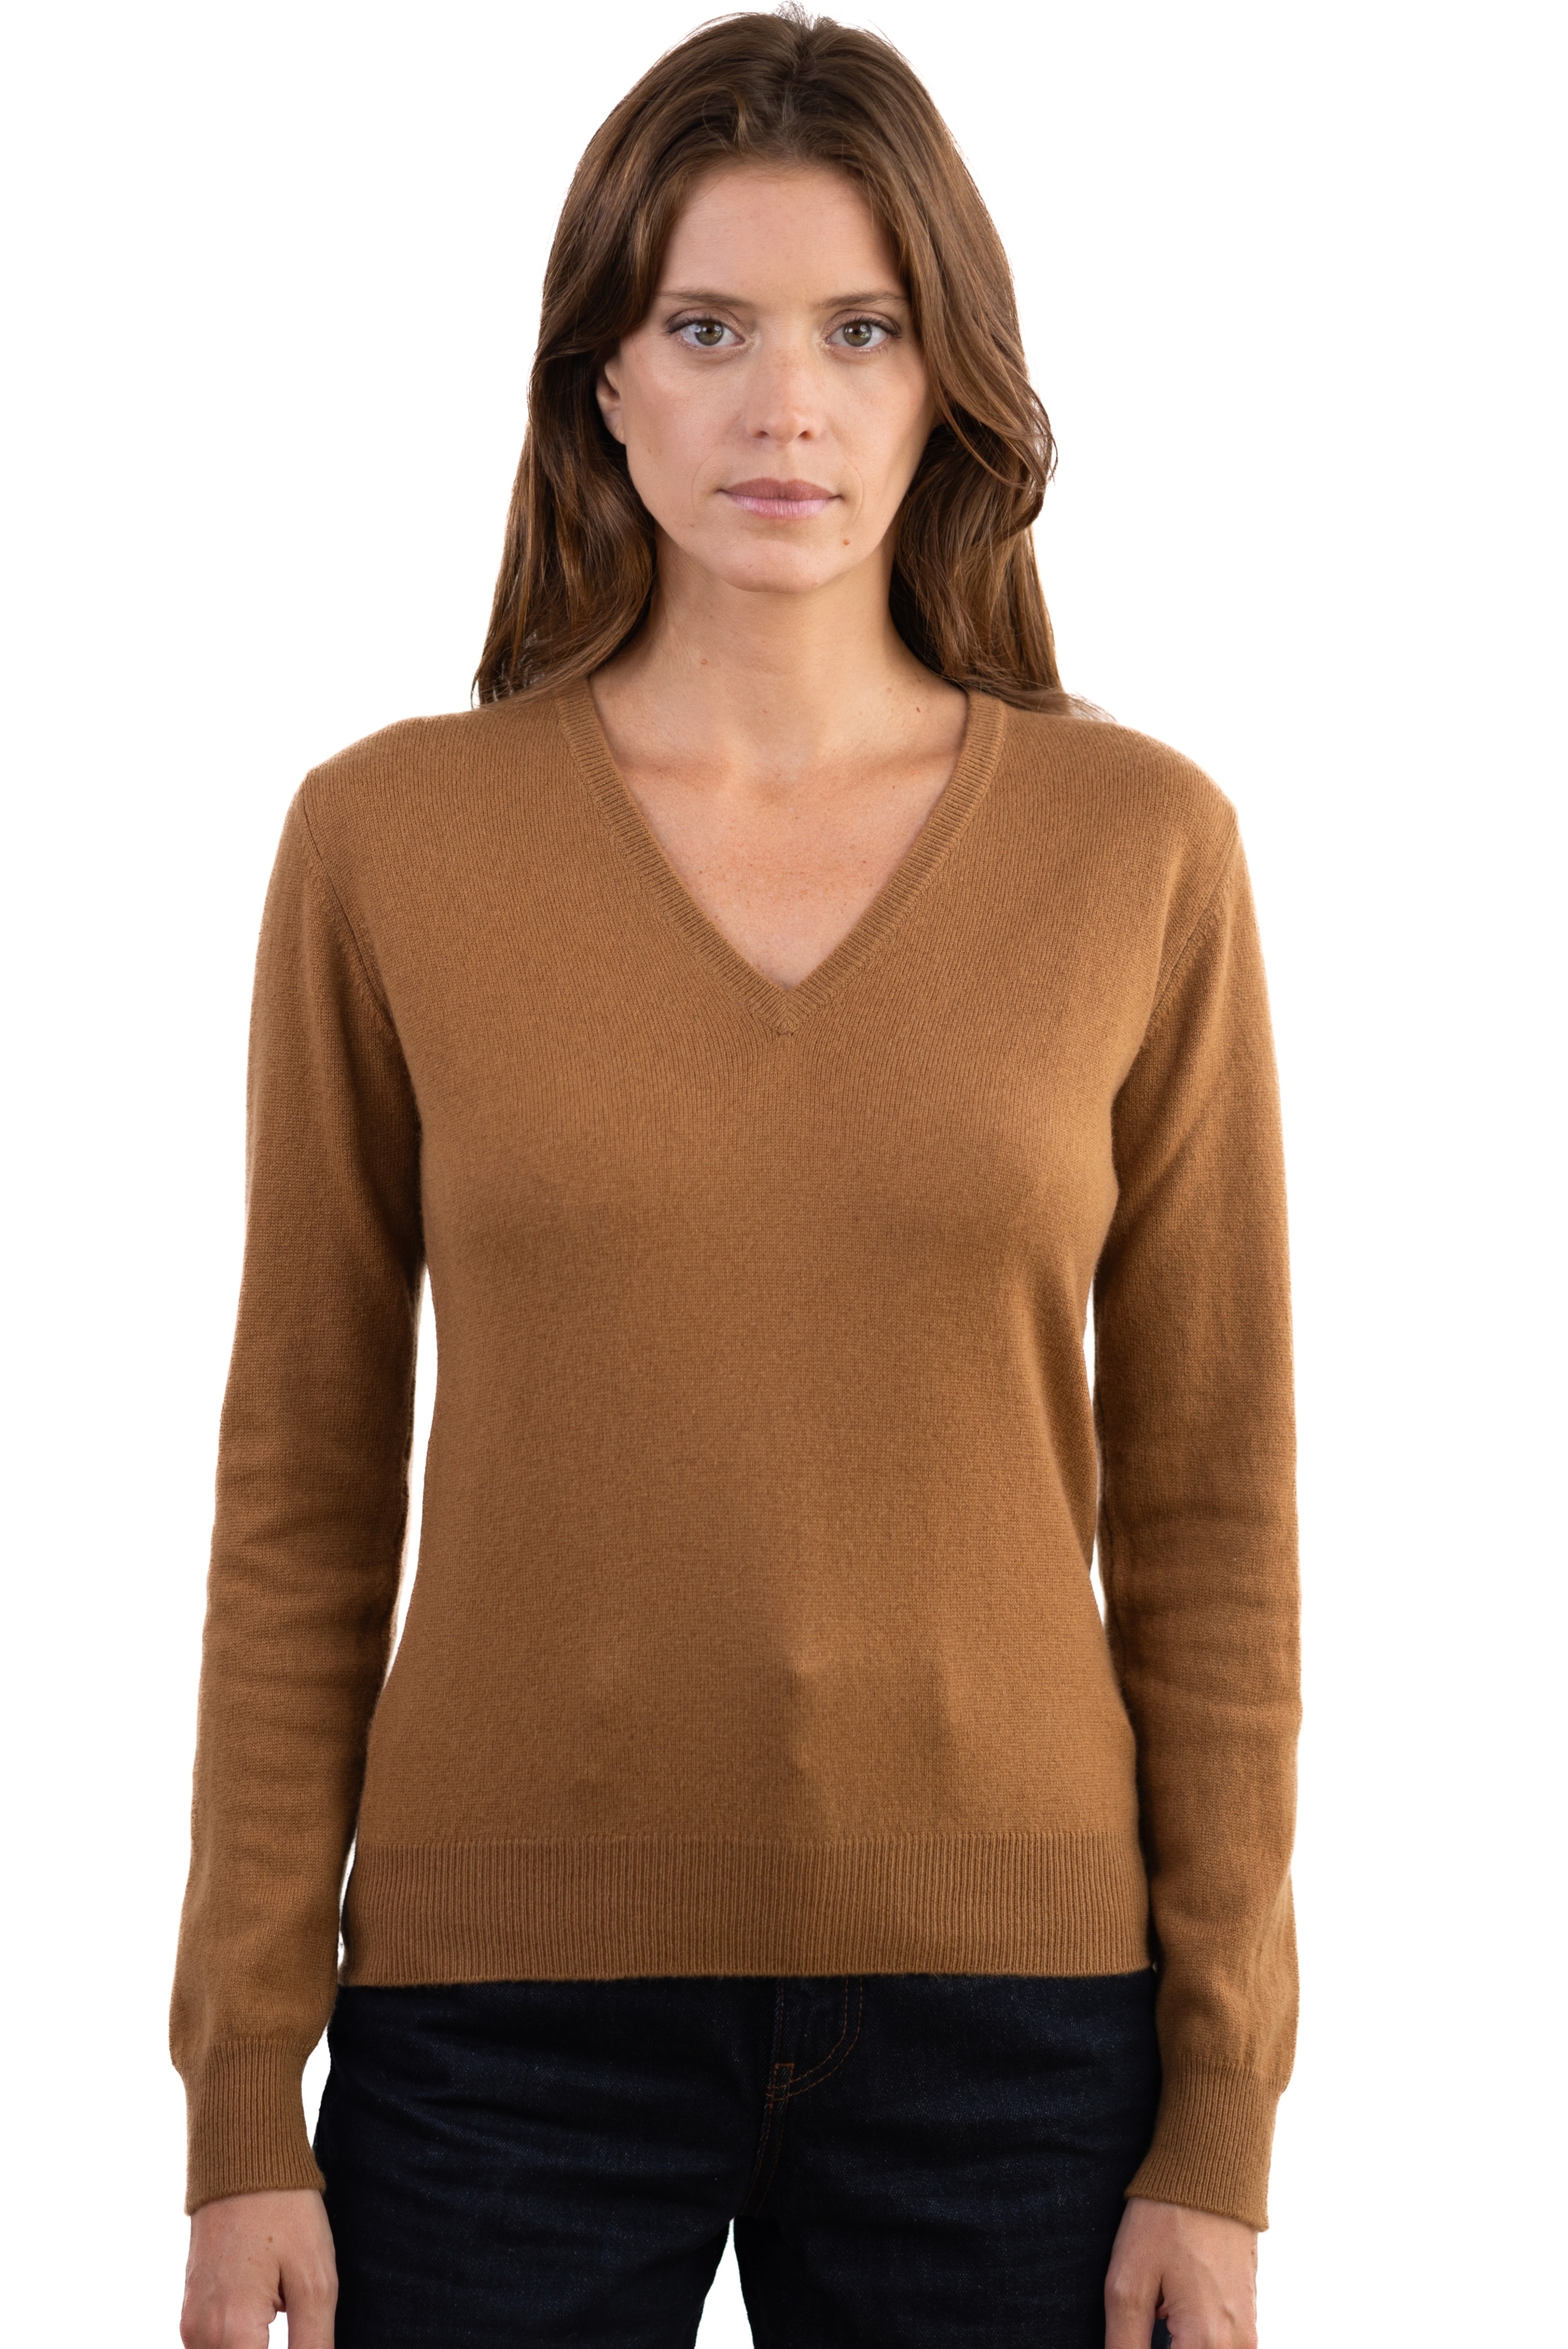 Cachemire pull femme faustine butterscotch s